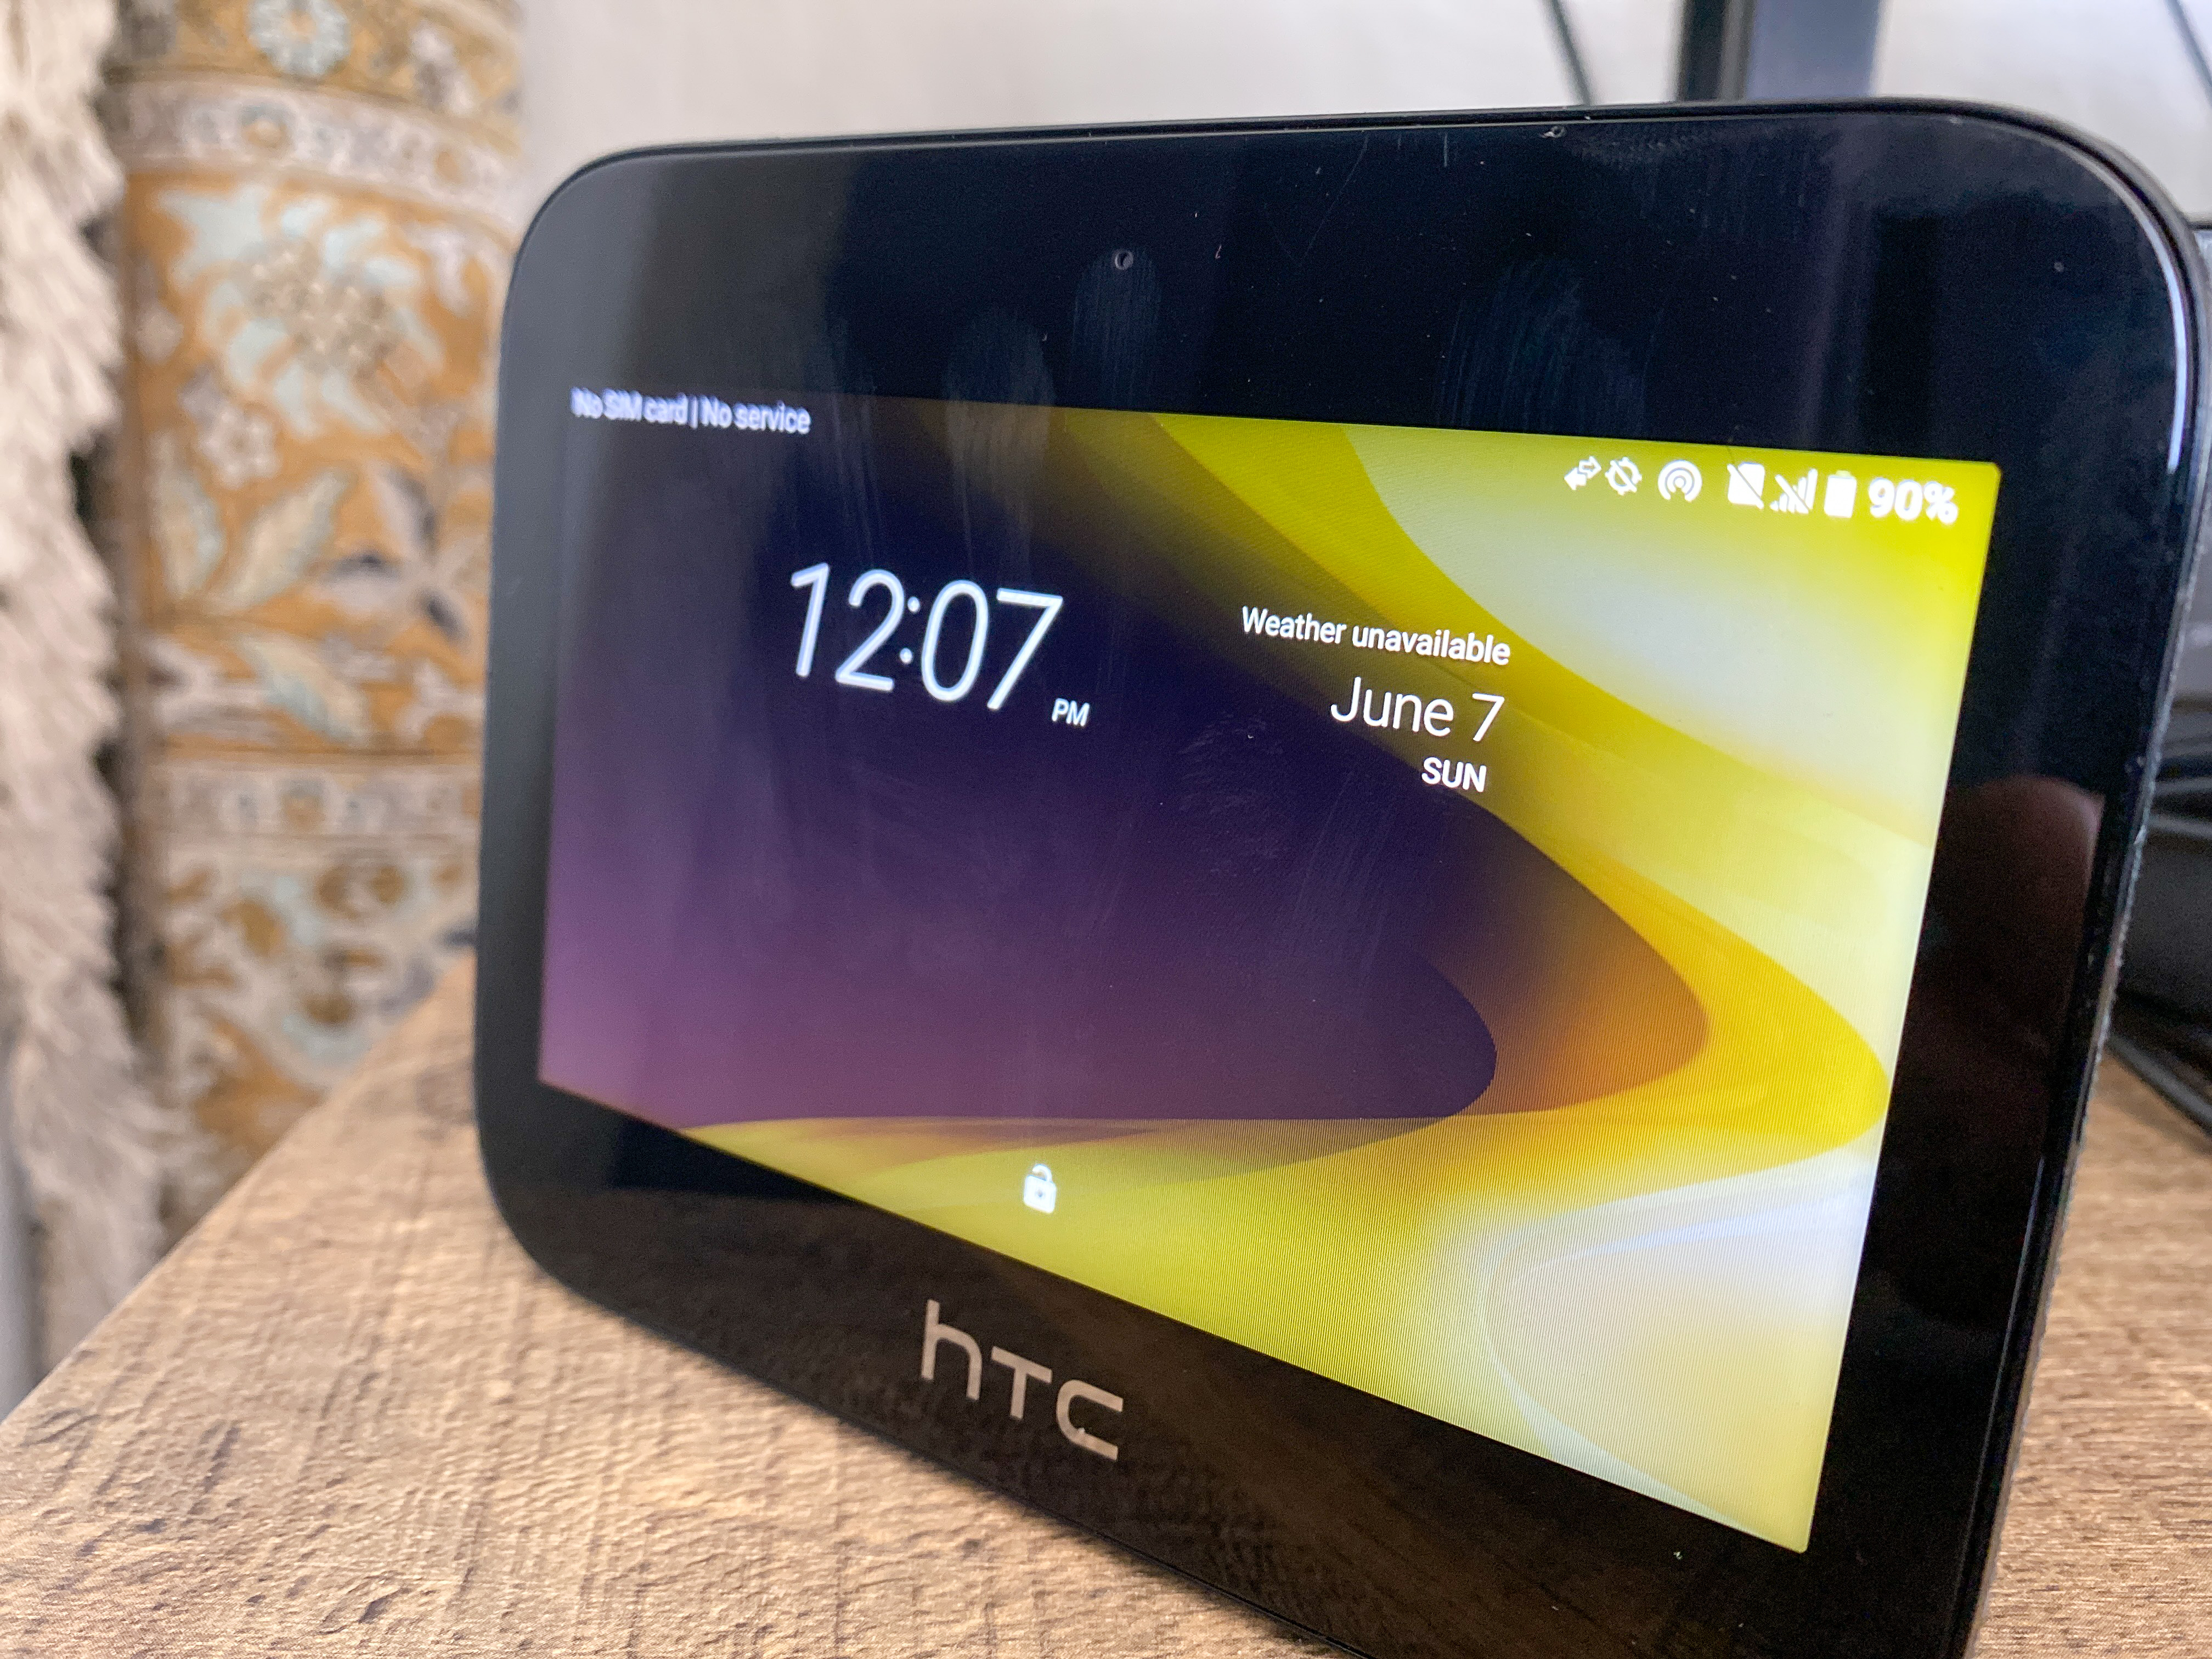 HTC 5G Hub in Android mode